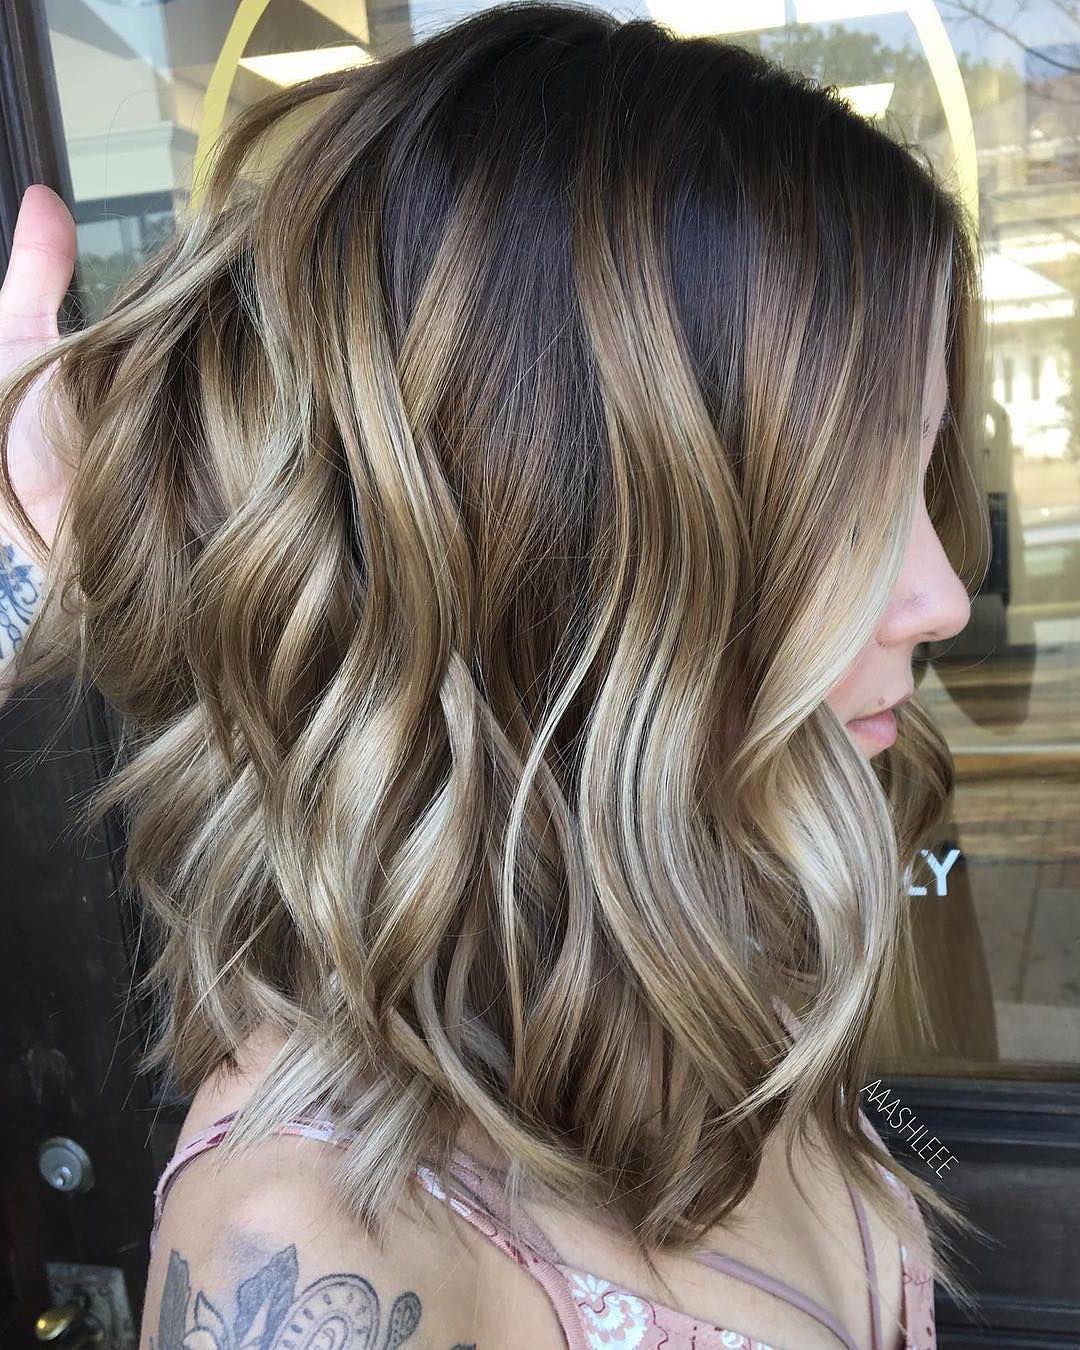 10 Ombre Balayage Hairstyles For Medium Length Hair, Hair Color 2019 With Most Up To Date Ombre Medium Hairstyles (View 4 of 20)